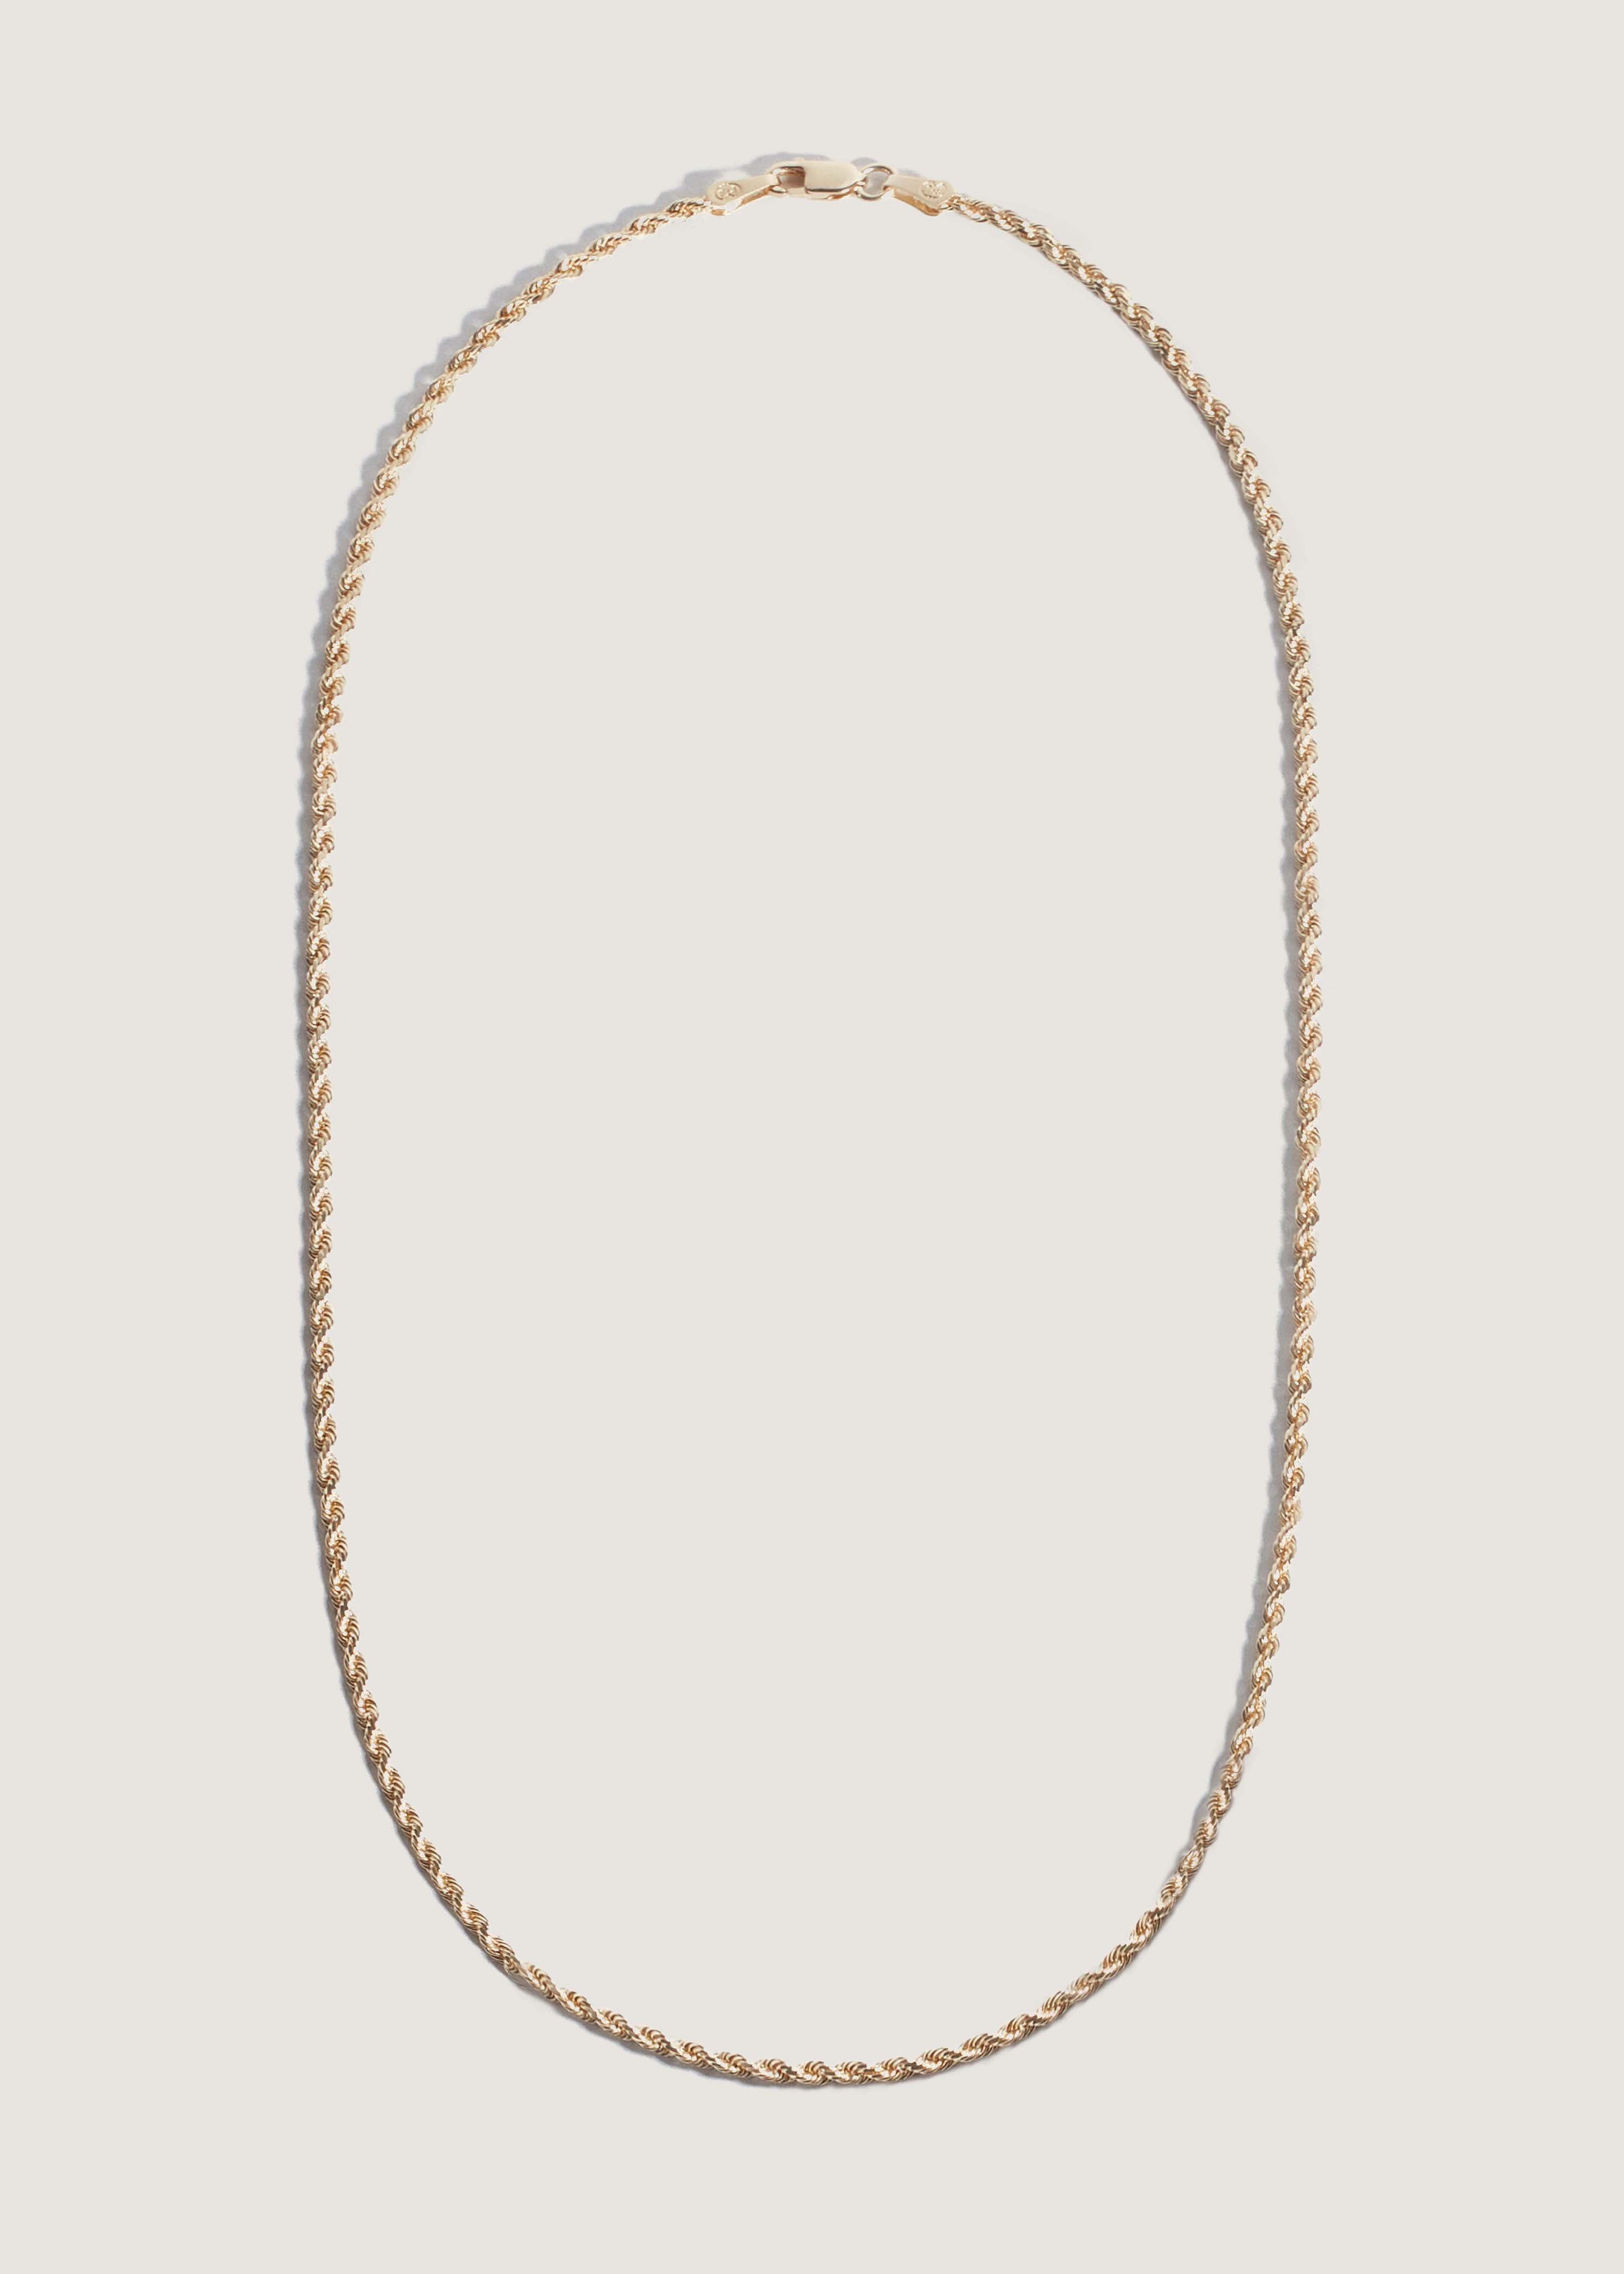 Rope Chain Necklace 14k Gold - Kinn